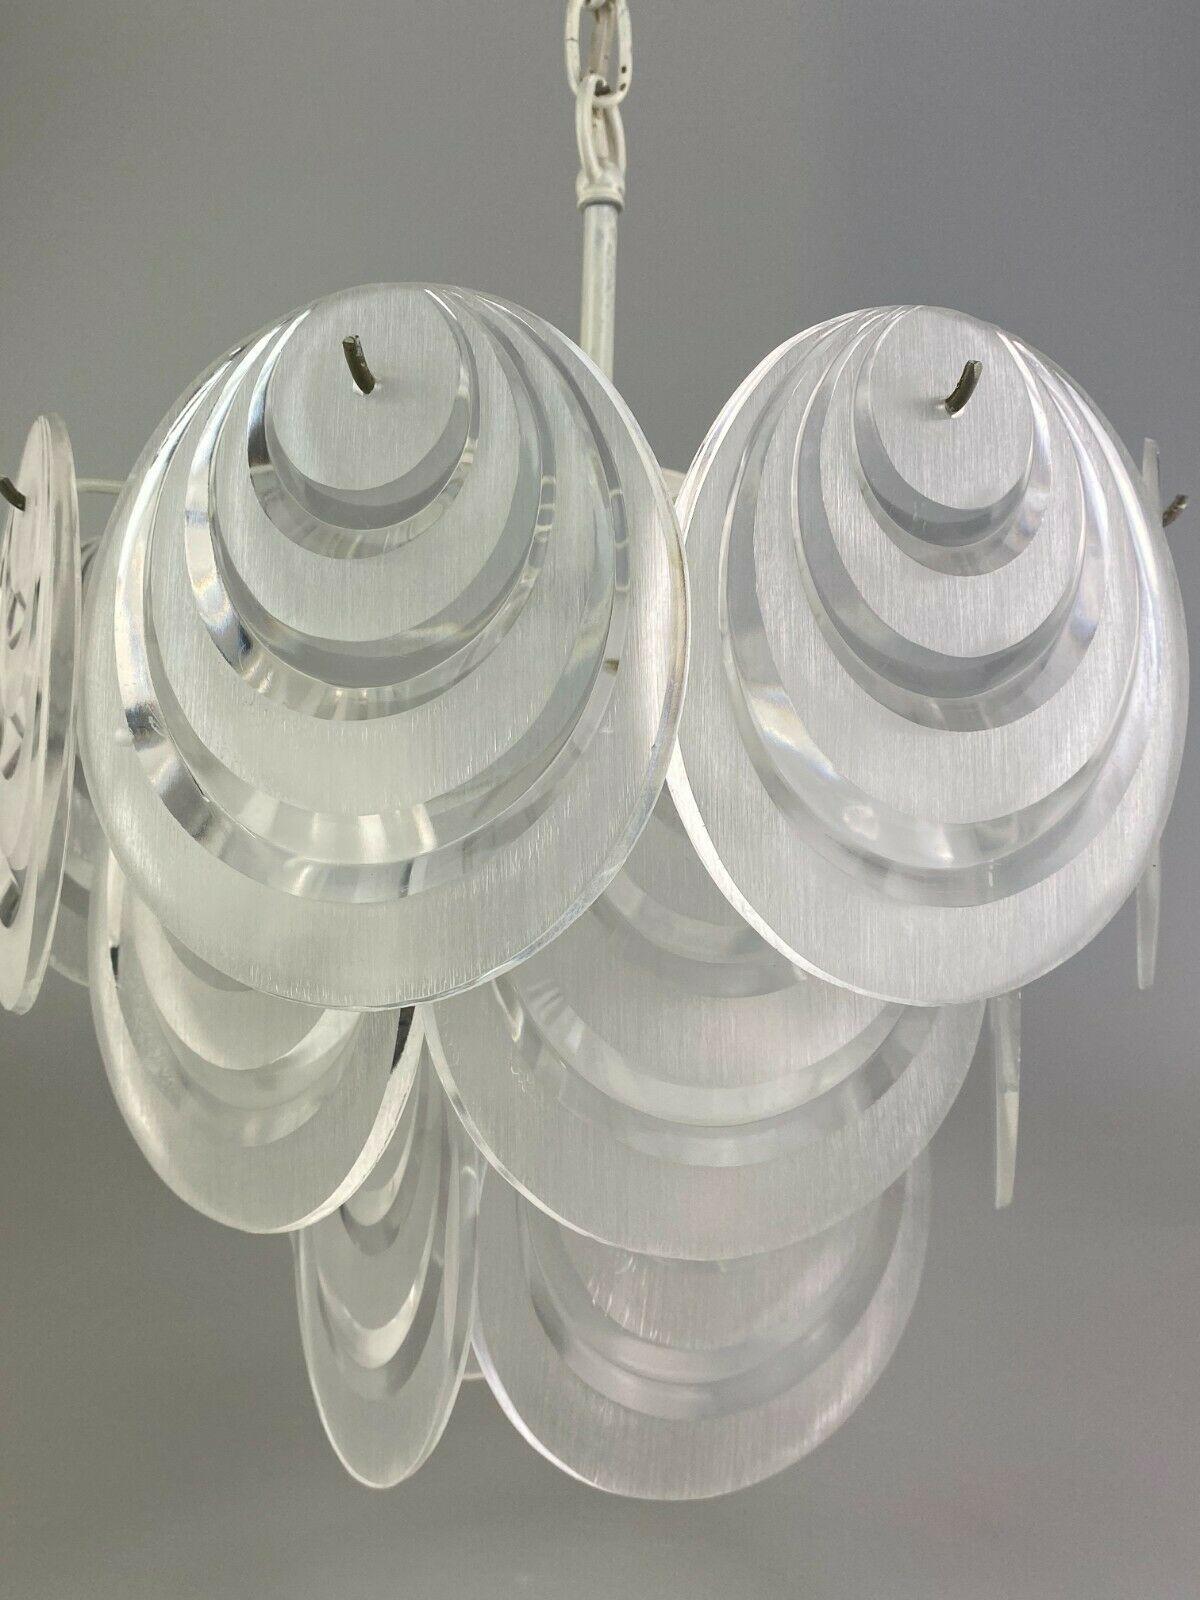 70s Lamp Light Hanging Lamp Ceiling Lamp Space Age Design Plastic For Sale 4